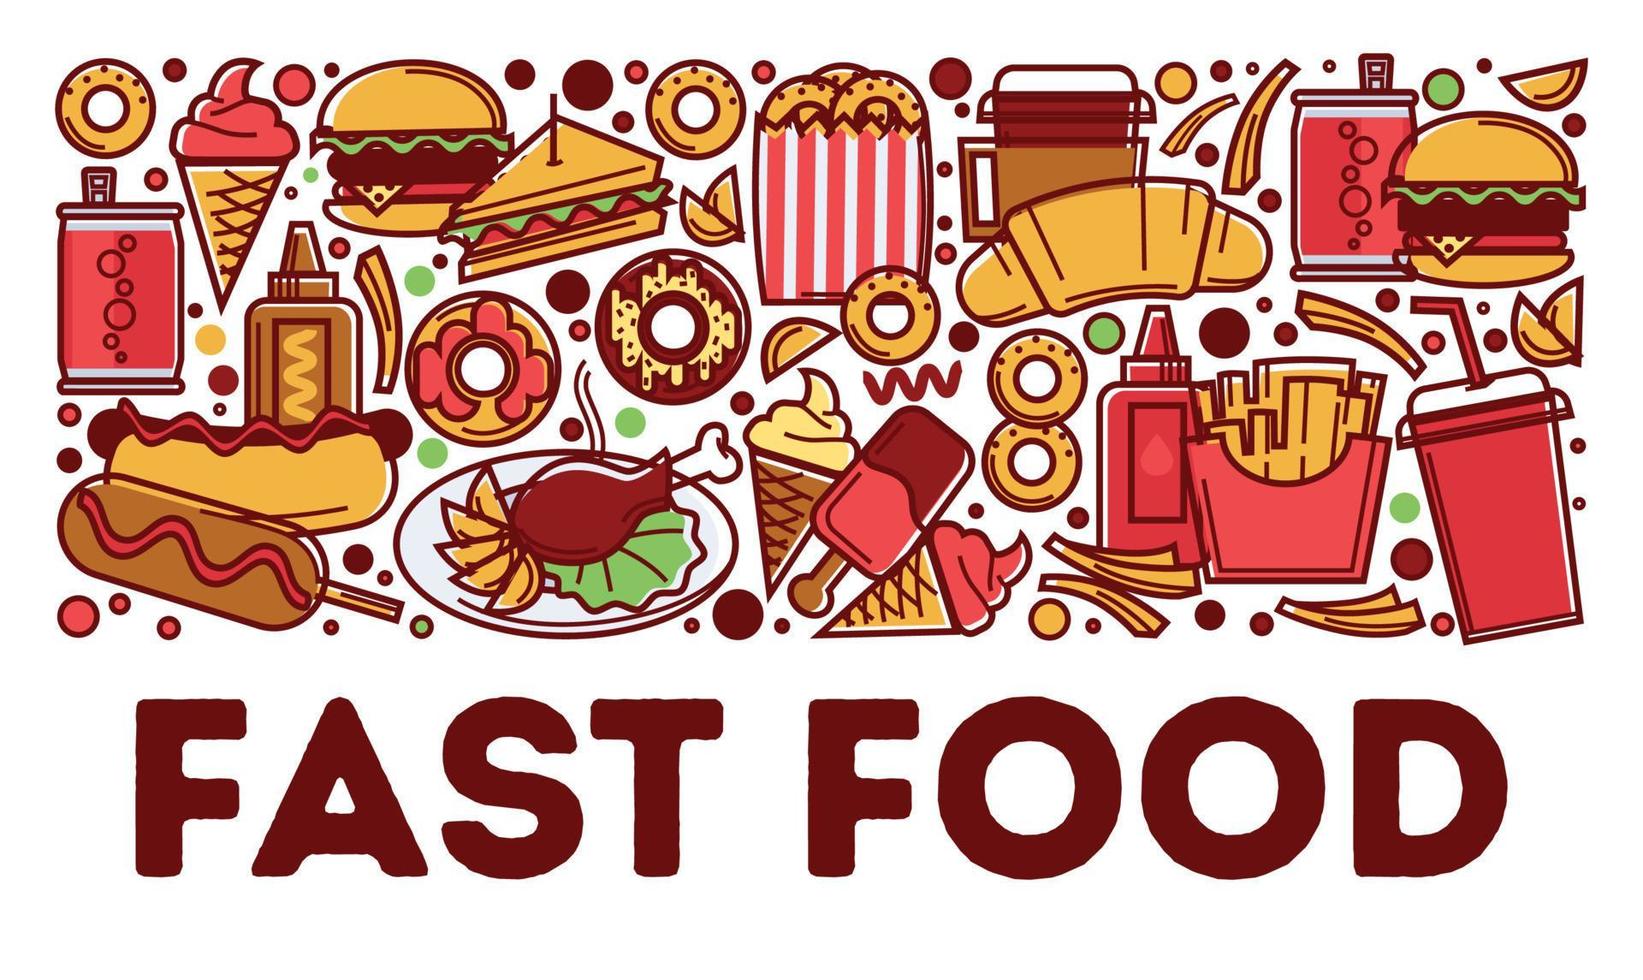 Fast food dishes and drinks, snacks and beverages vector